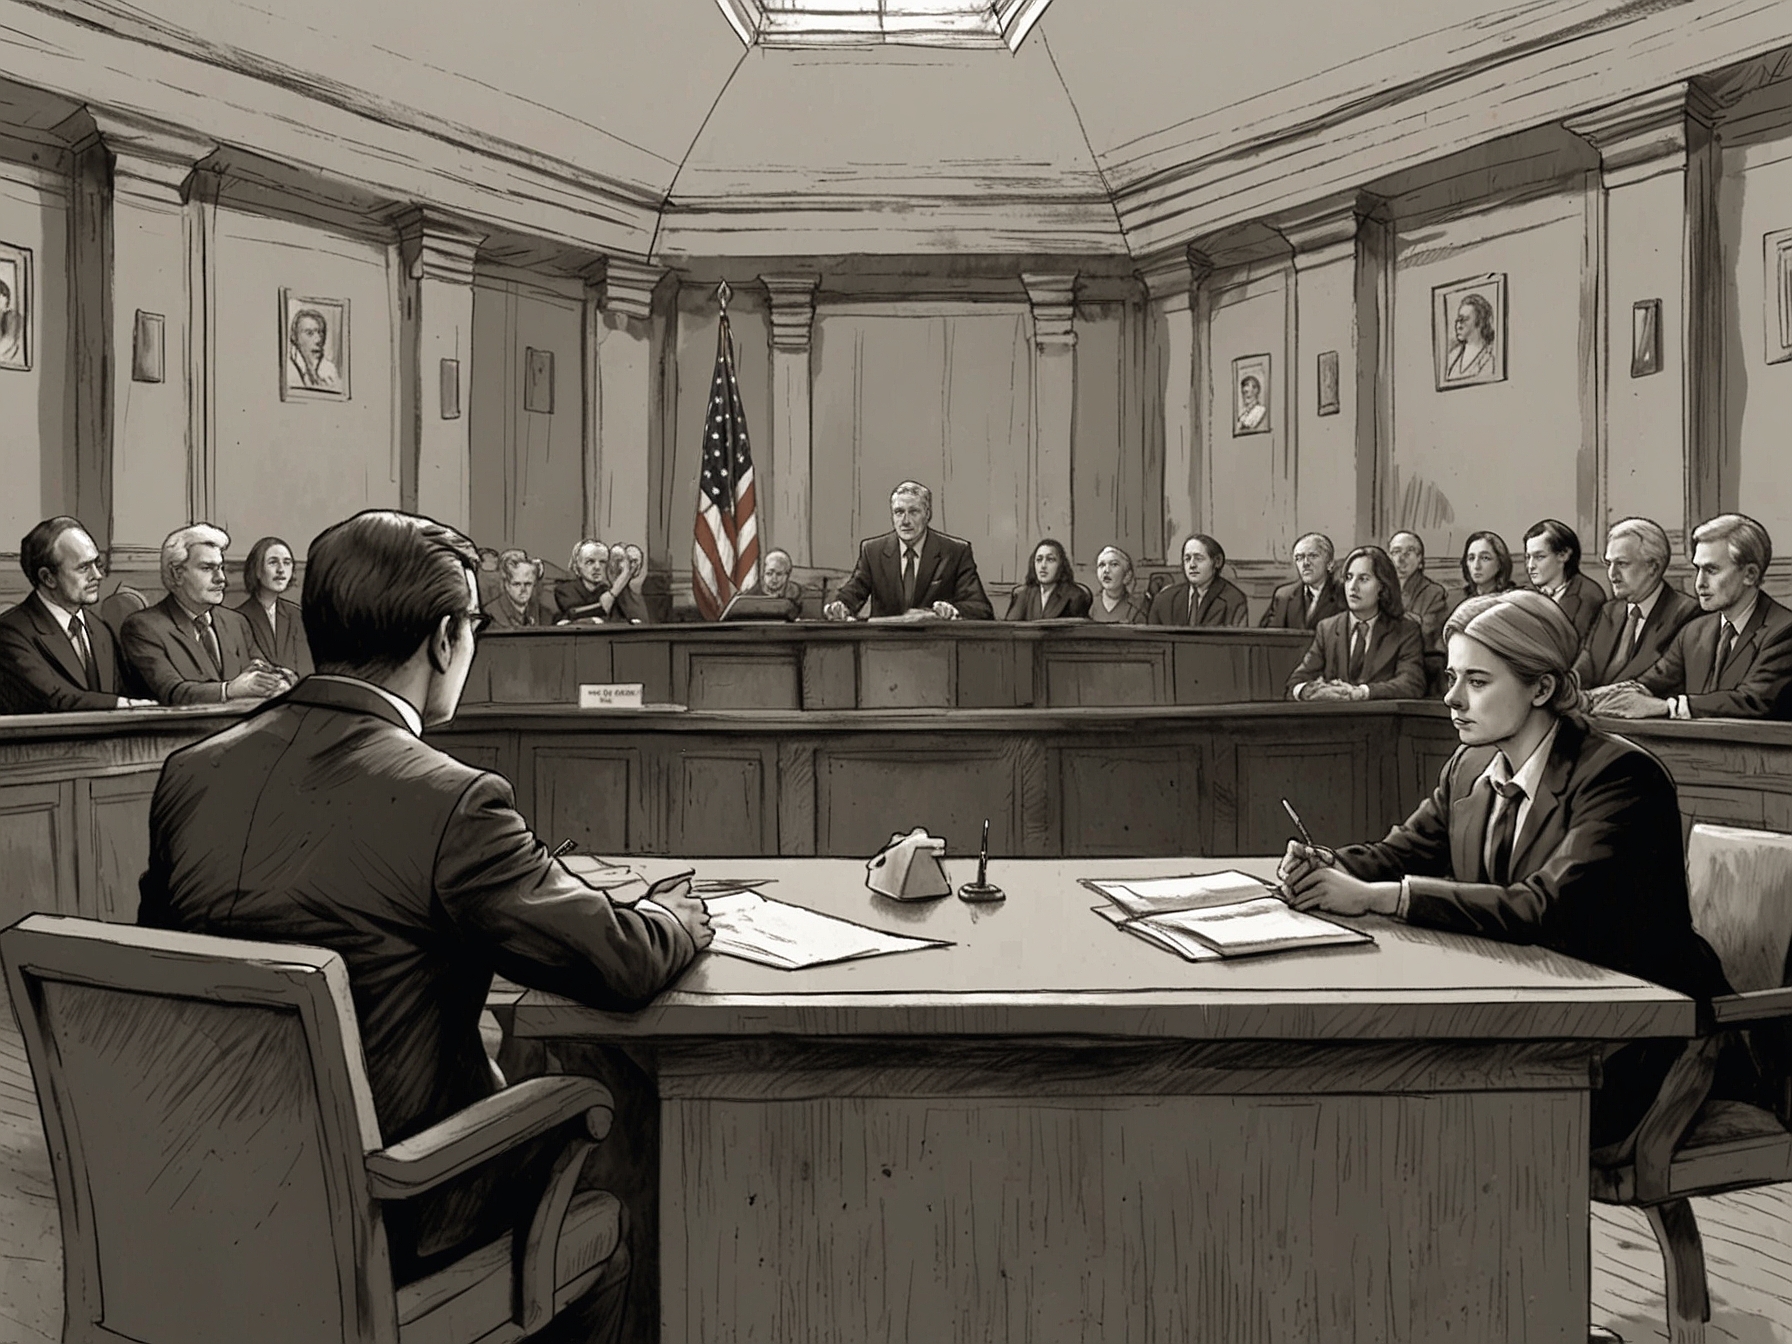 A courtroom scene with defense witnesses presenting their testimonies, aiming to counter the prosecution's allegations and offer alternative perspectives to the jury.